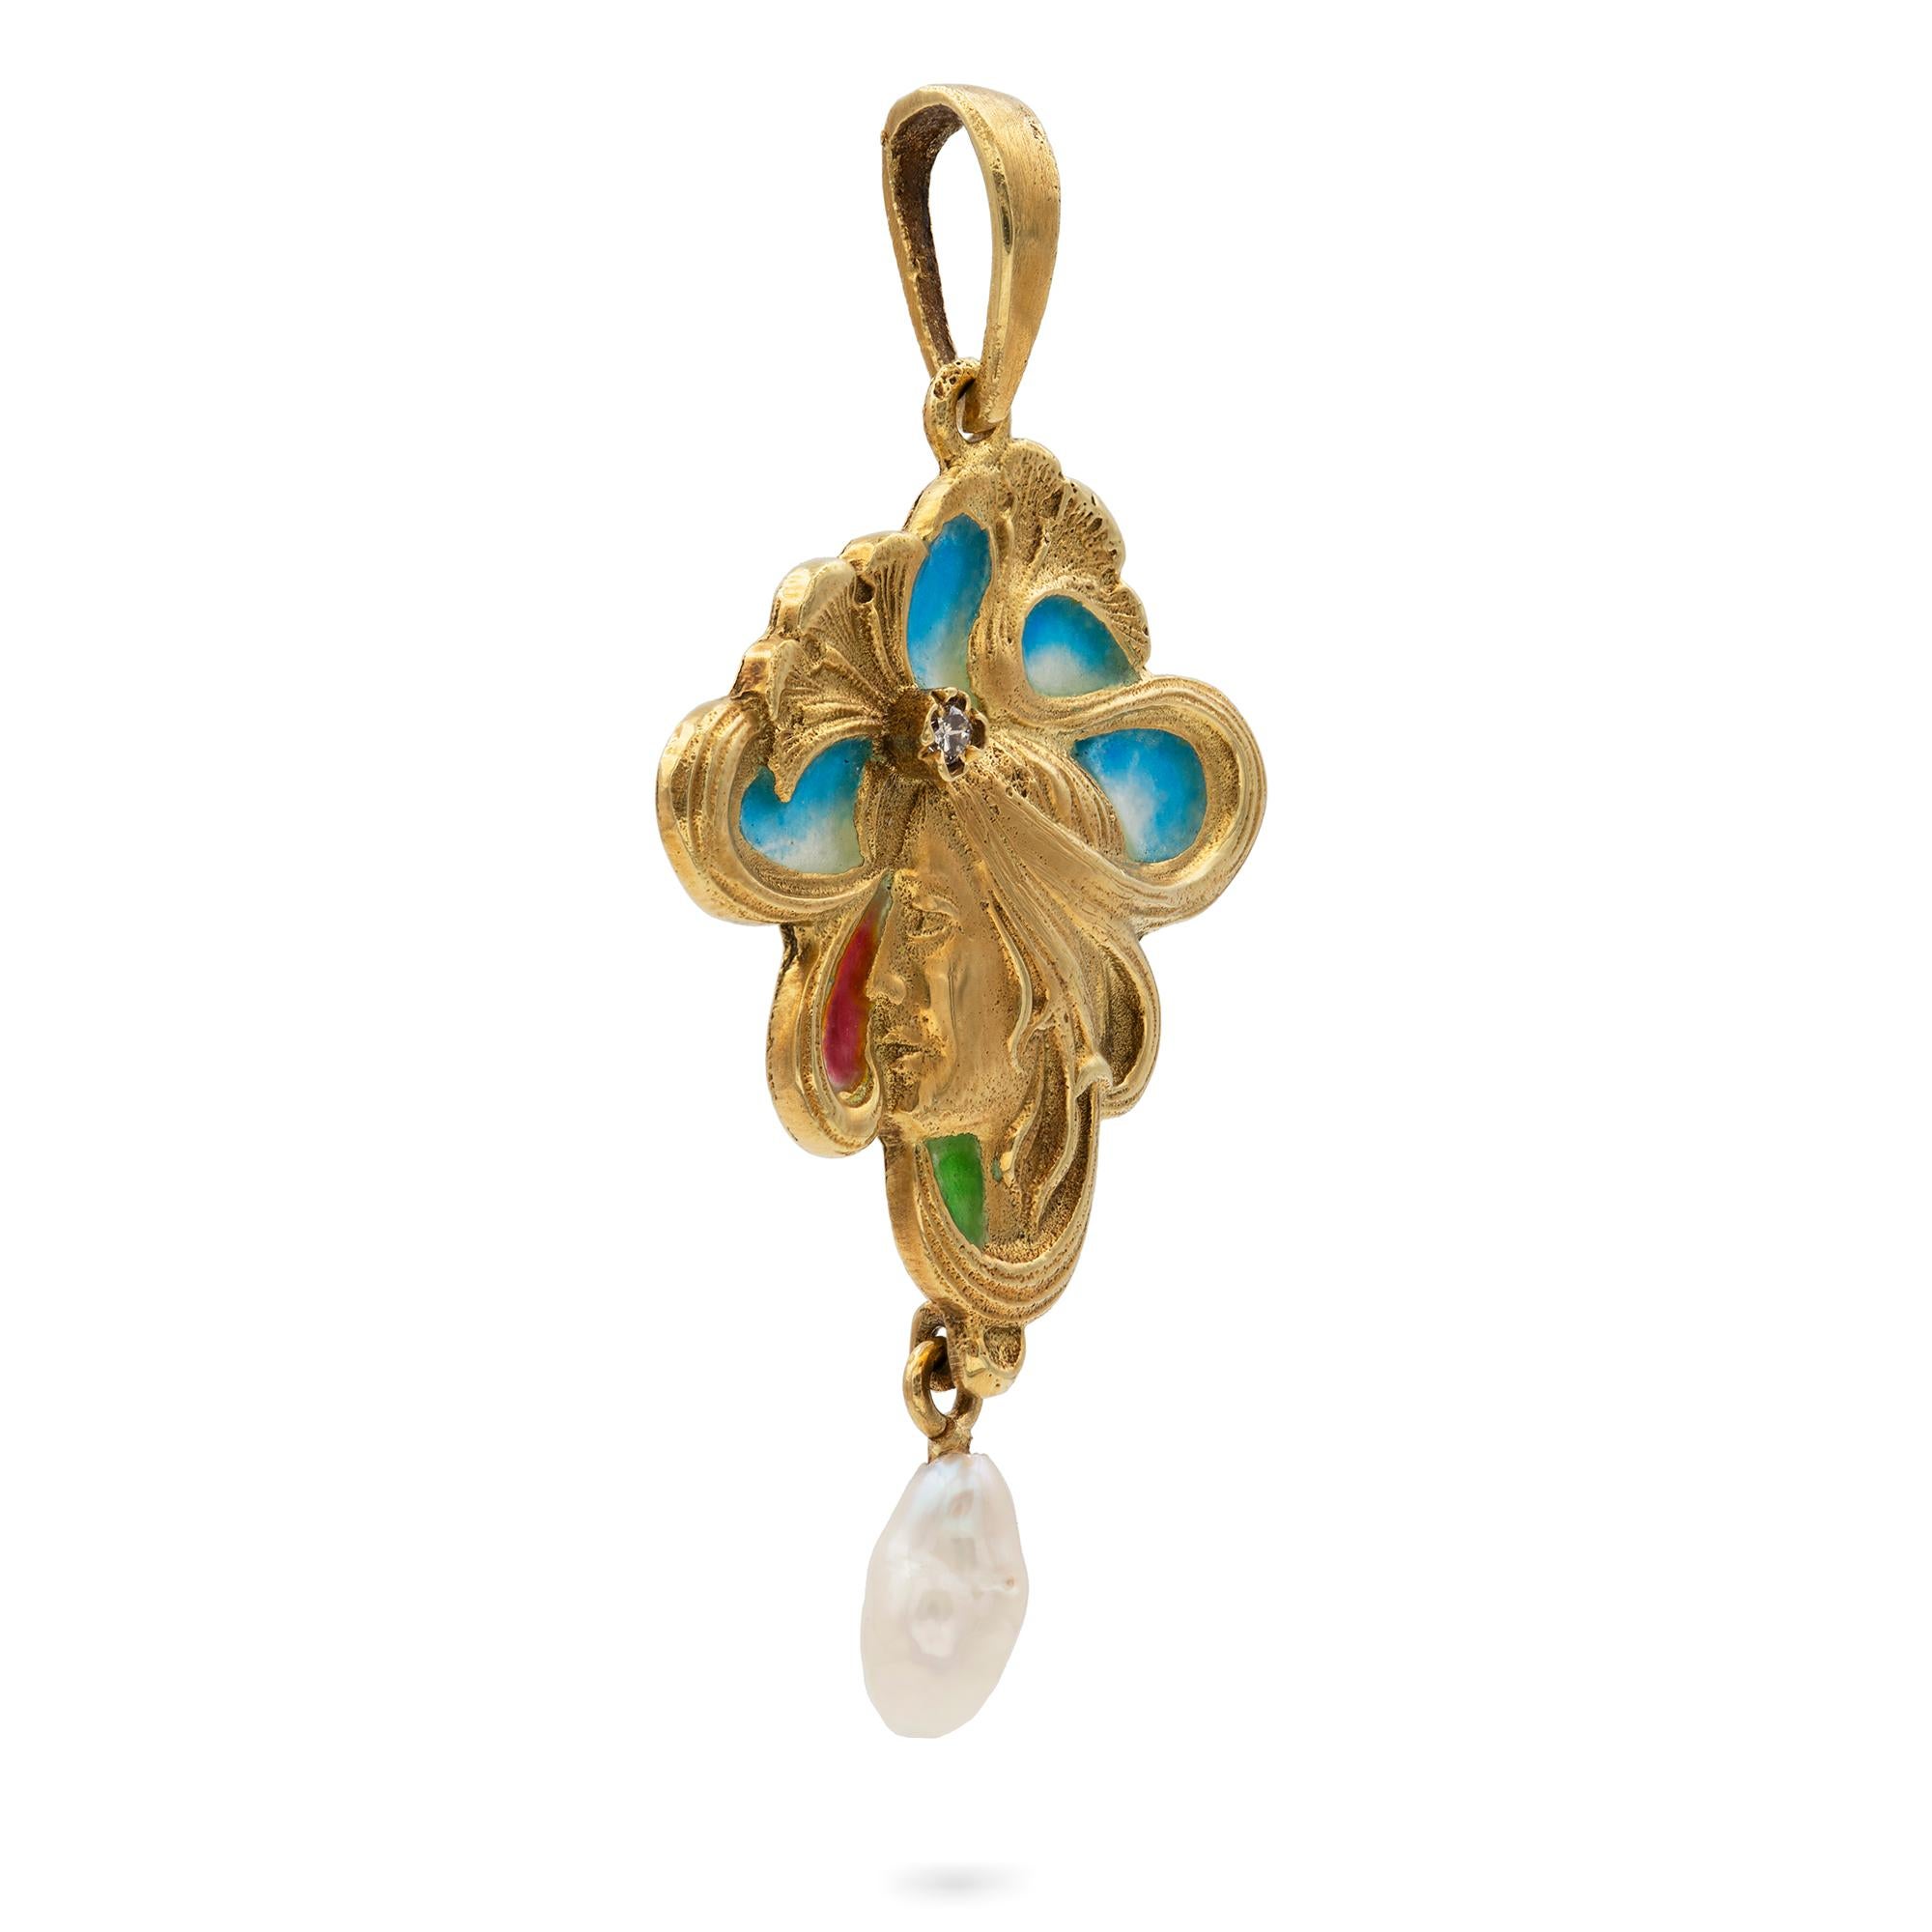 A stylised Art Nouveau pendant, depicting a lady in profile with floral decorations and an old-cut diamond set on the forehead, all with blue, red and green plique-a-jour enamel, suspending a freshwater pearl, all mounted in yellow gold, measuring